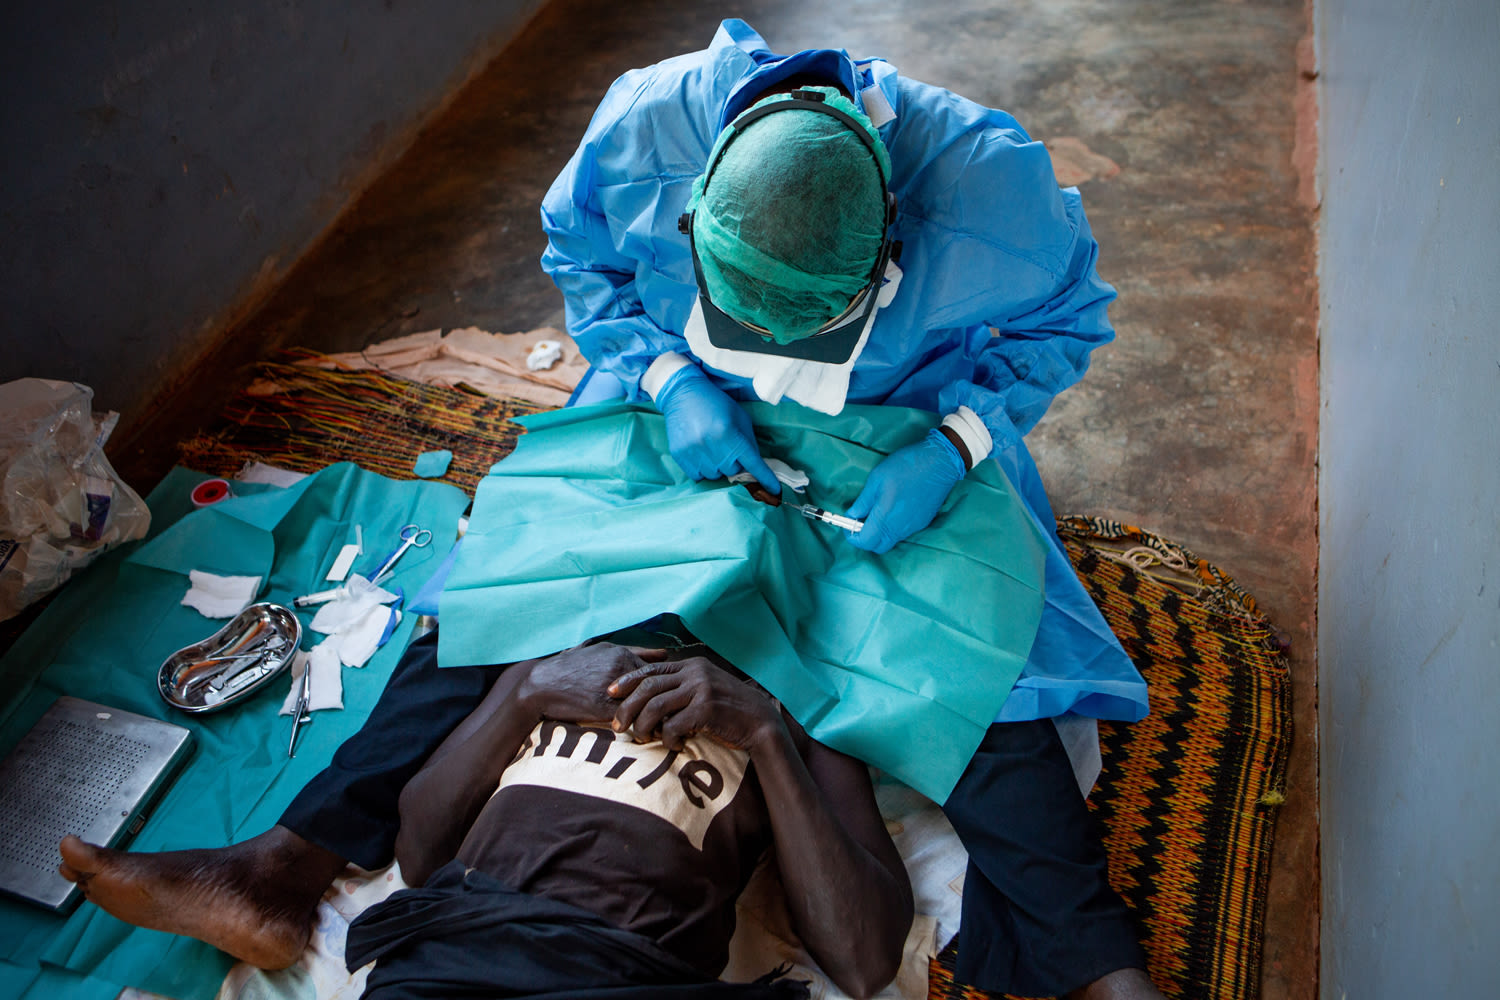 Forma, trachoma surgeon, operates on Nene on the porch of her home in rural Guinea Bissau